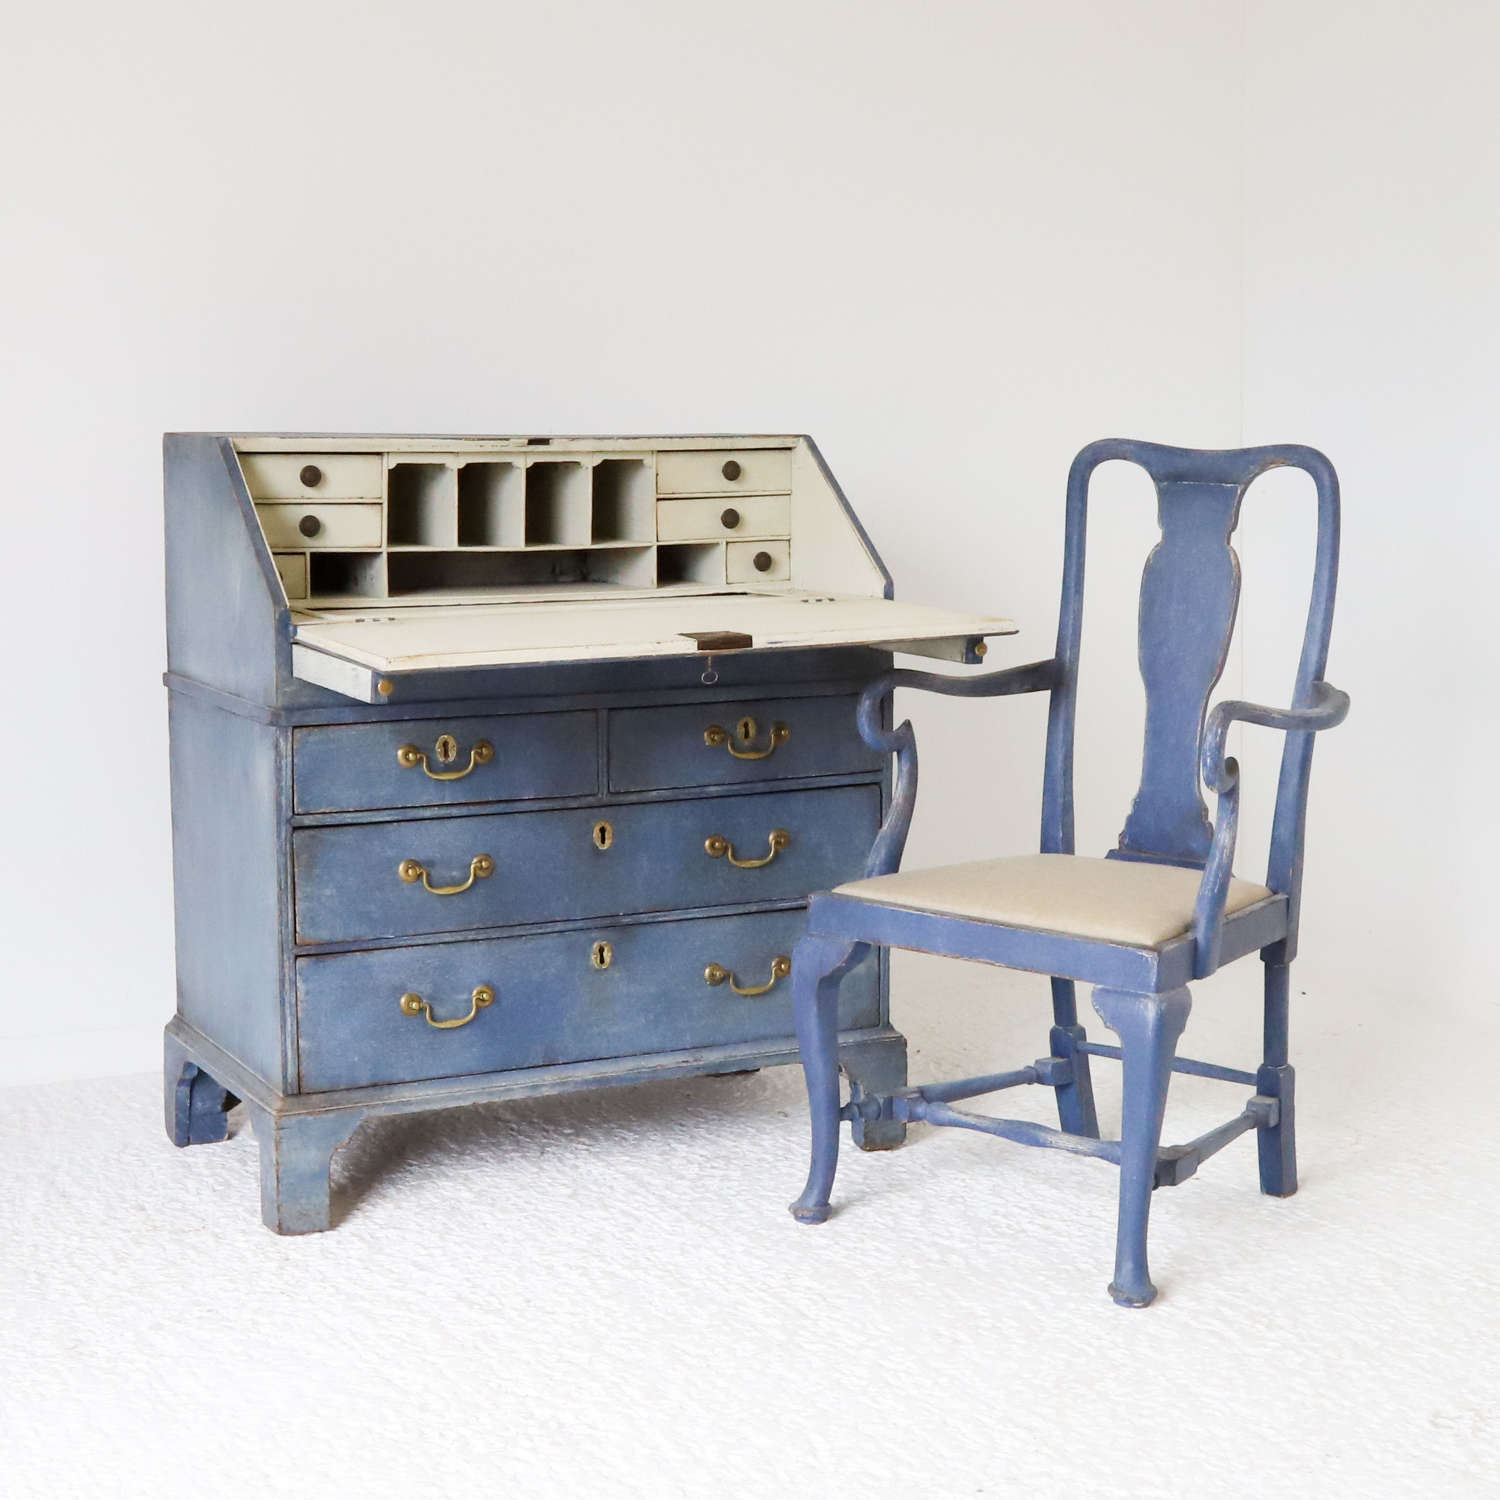 George 1st Bureau c1720 later painted in blue distressed finish